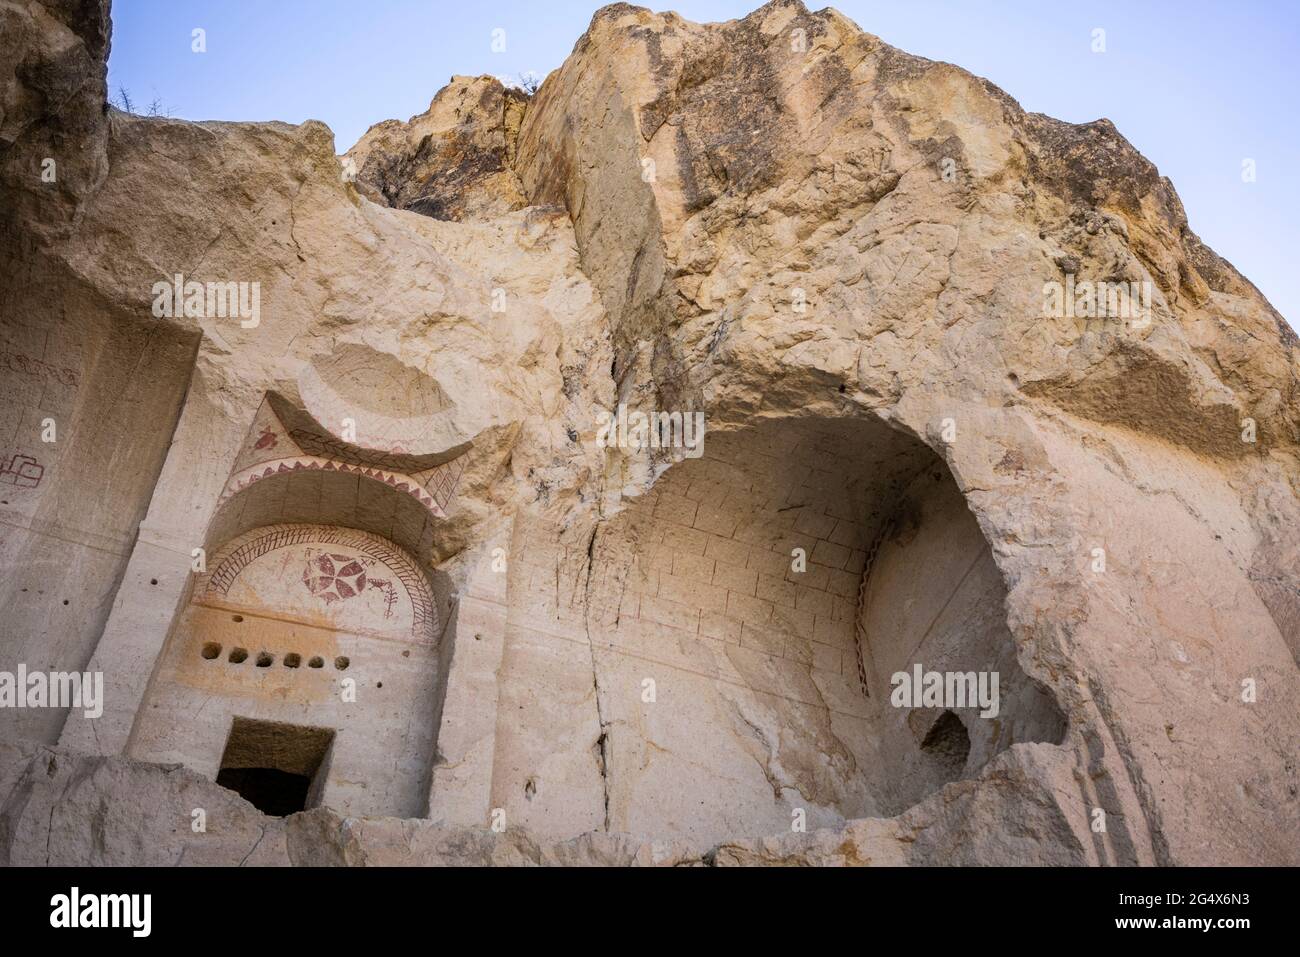 Turkey,Â NevsehirÂ Province, Goreme, Collapsing wall of Goreme Open Air Museum Stock Photo